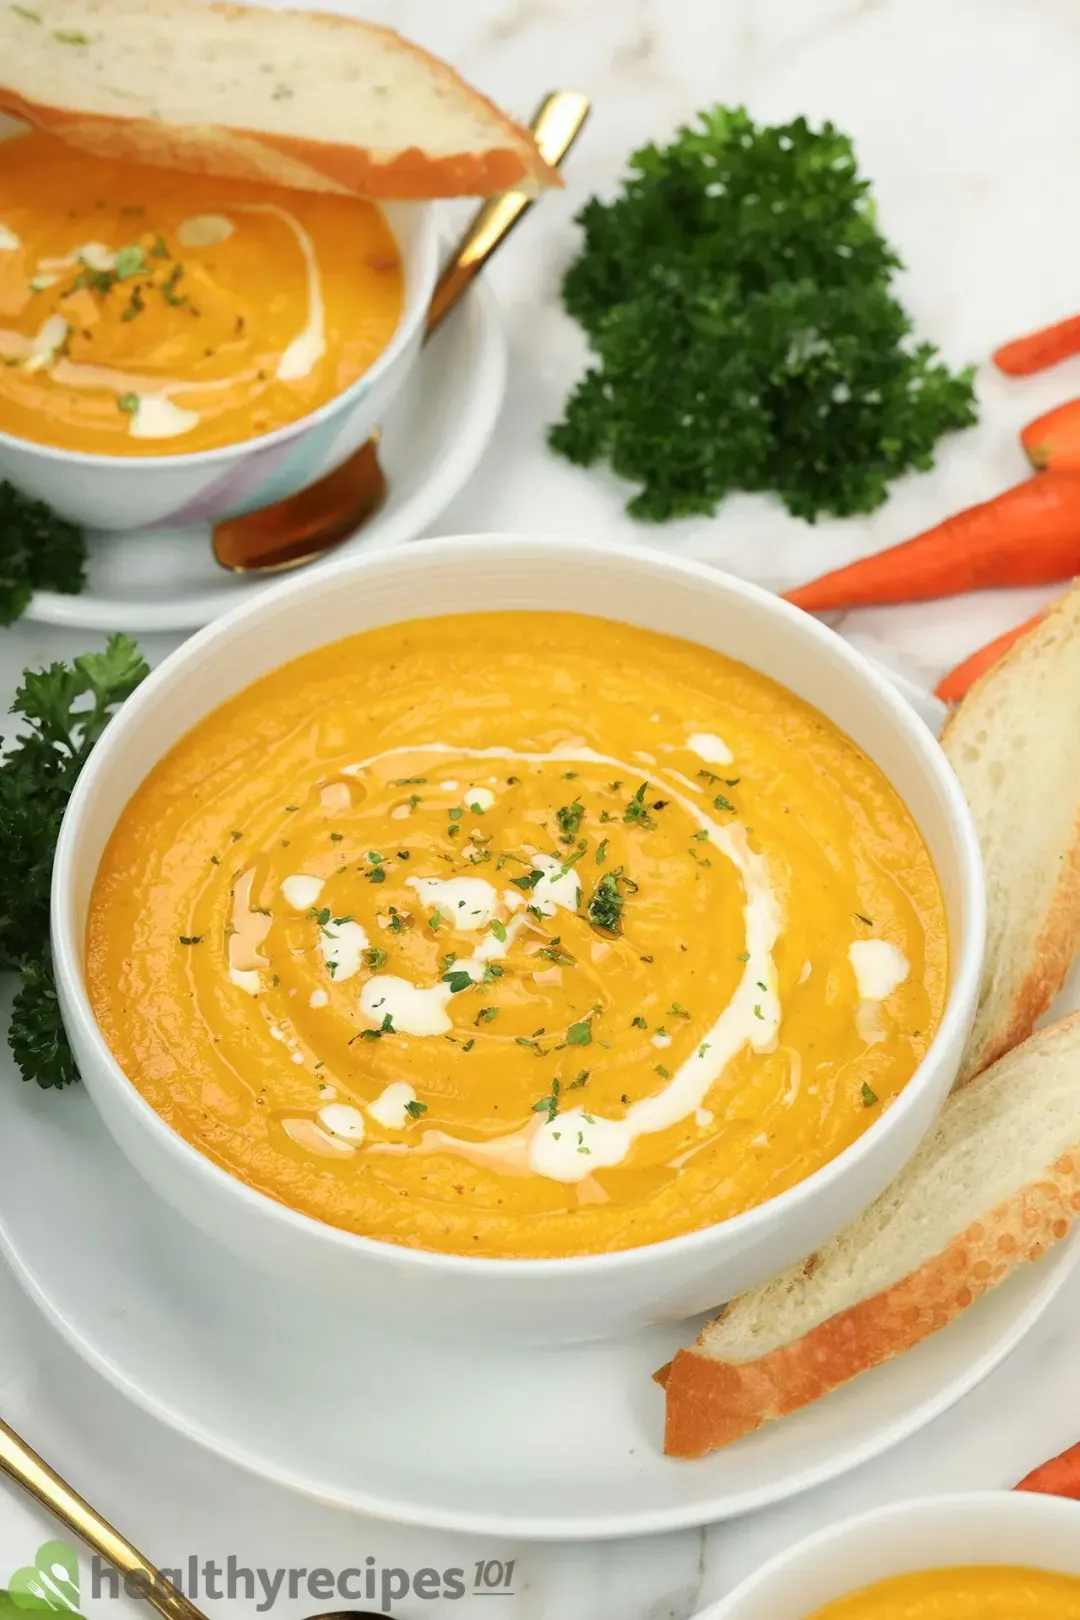 What Else Can You Add to Carrot Soup